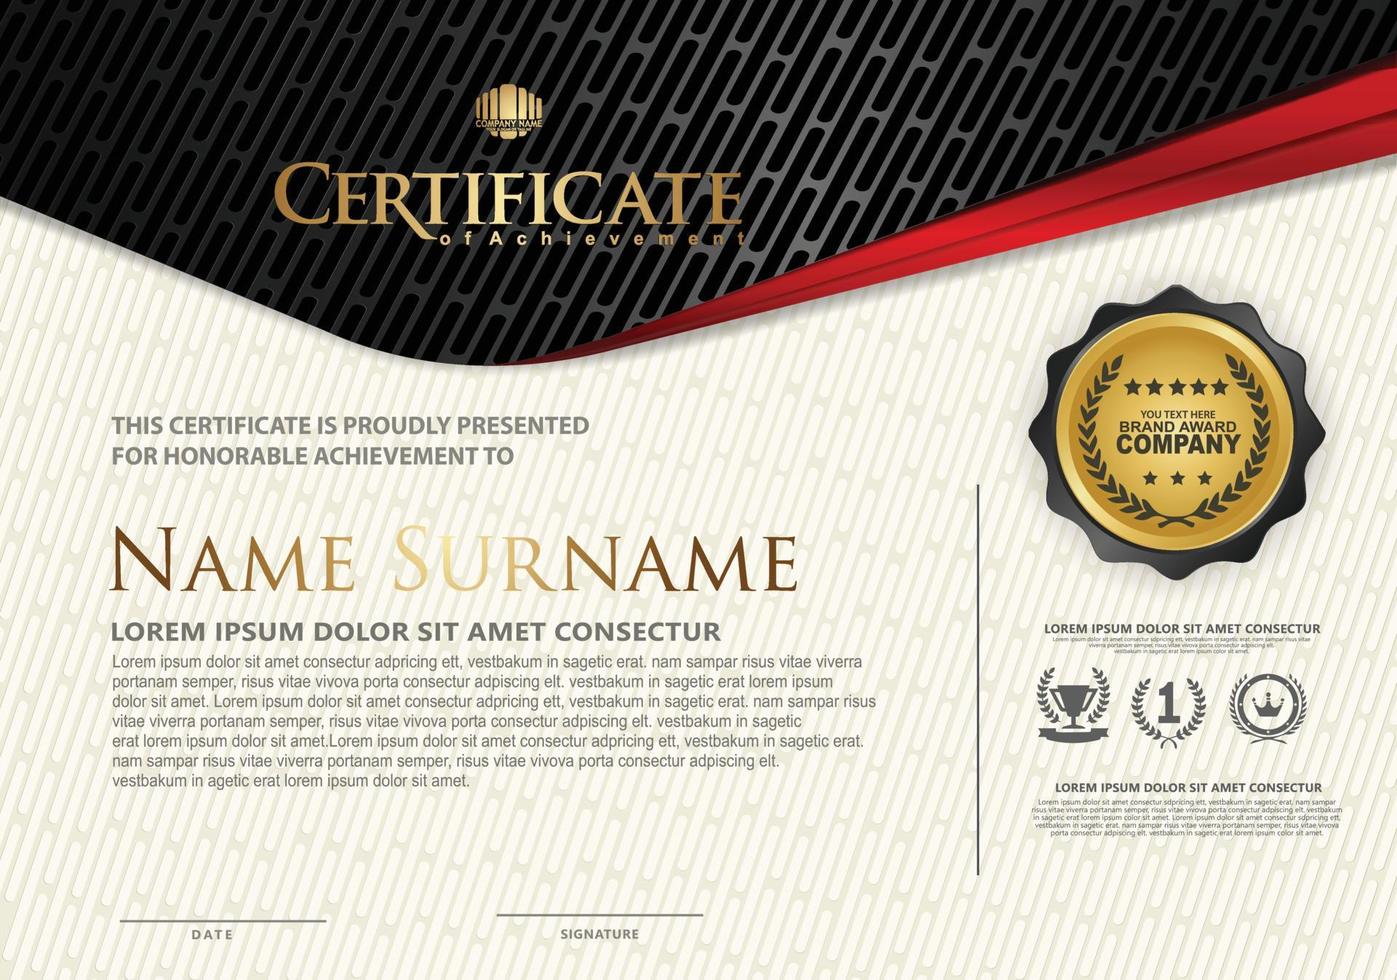 Certificate template with textured background, vector